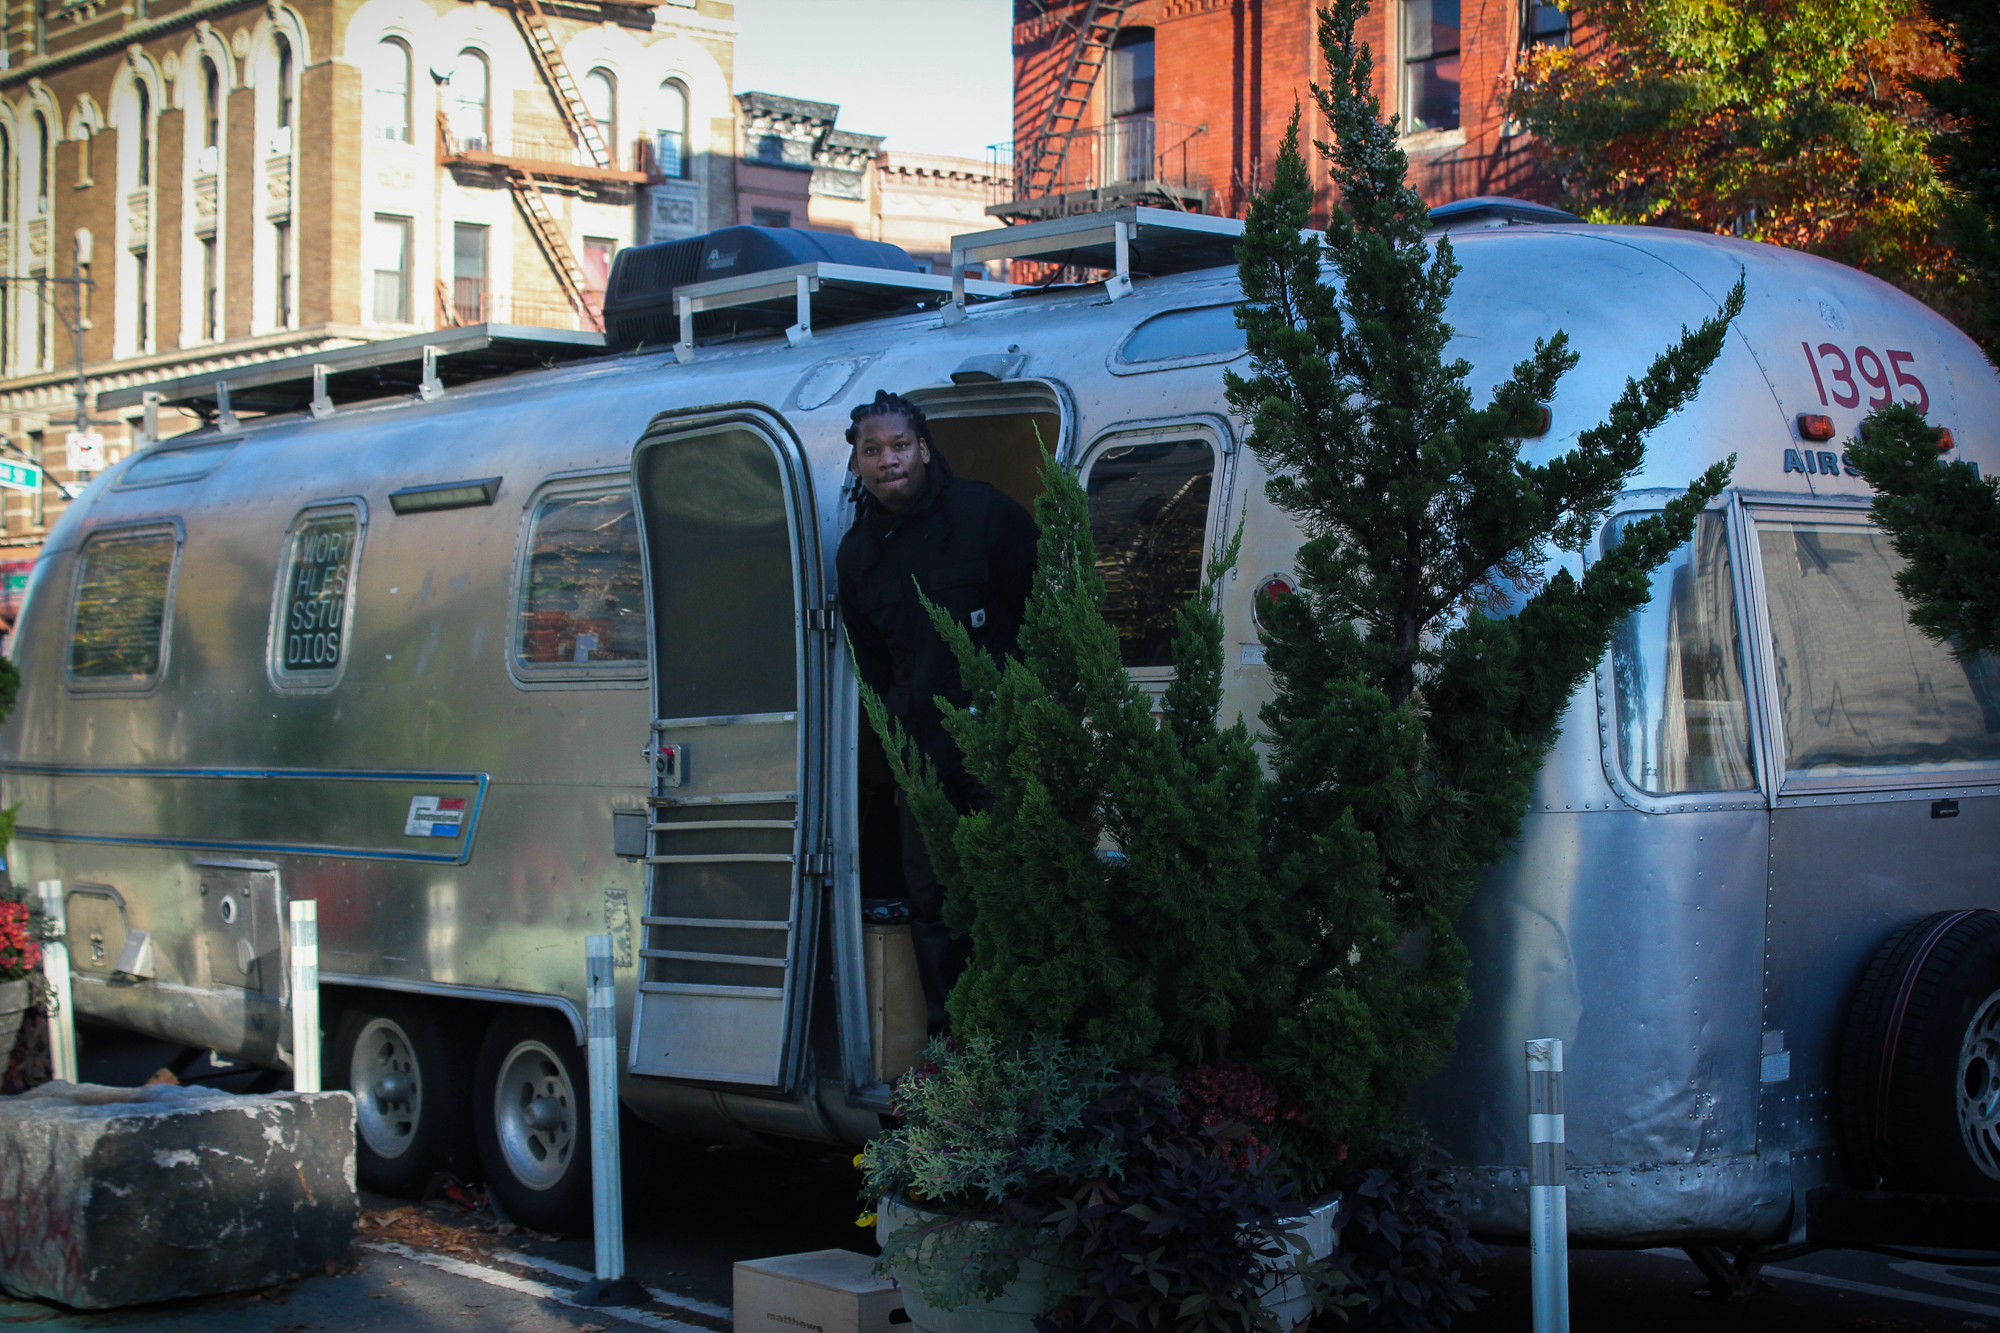 Kevin Claiborne peers out of Free Film: NYC’s trailer in Harlem’s Johnny Hartman Plaza. (Credit: Jolie Tanner)